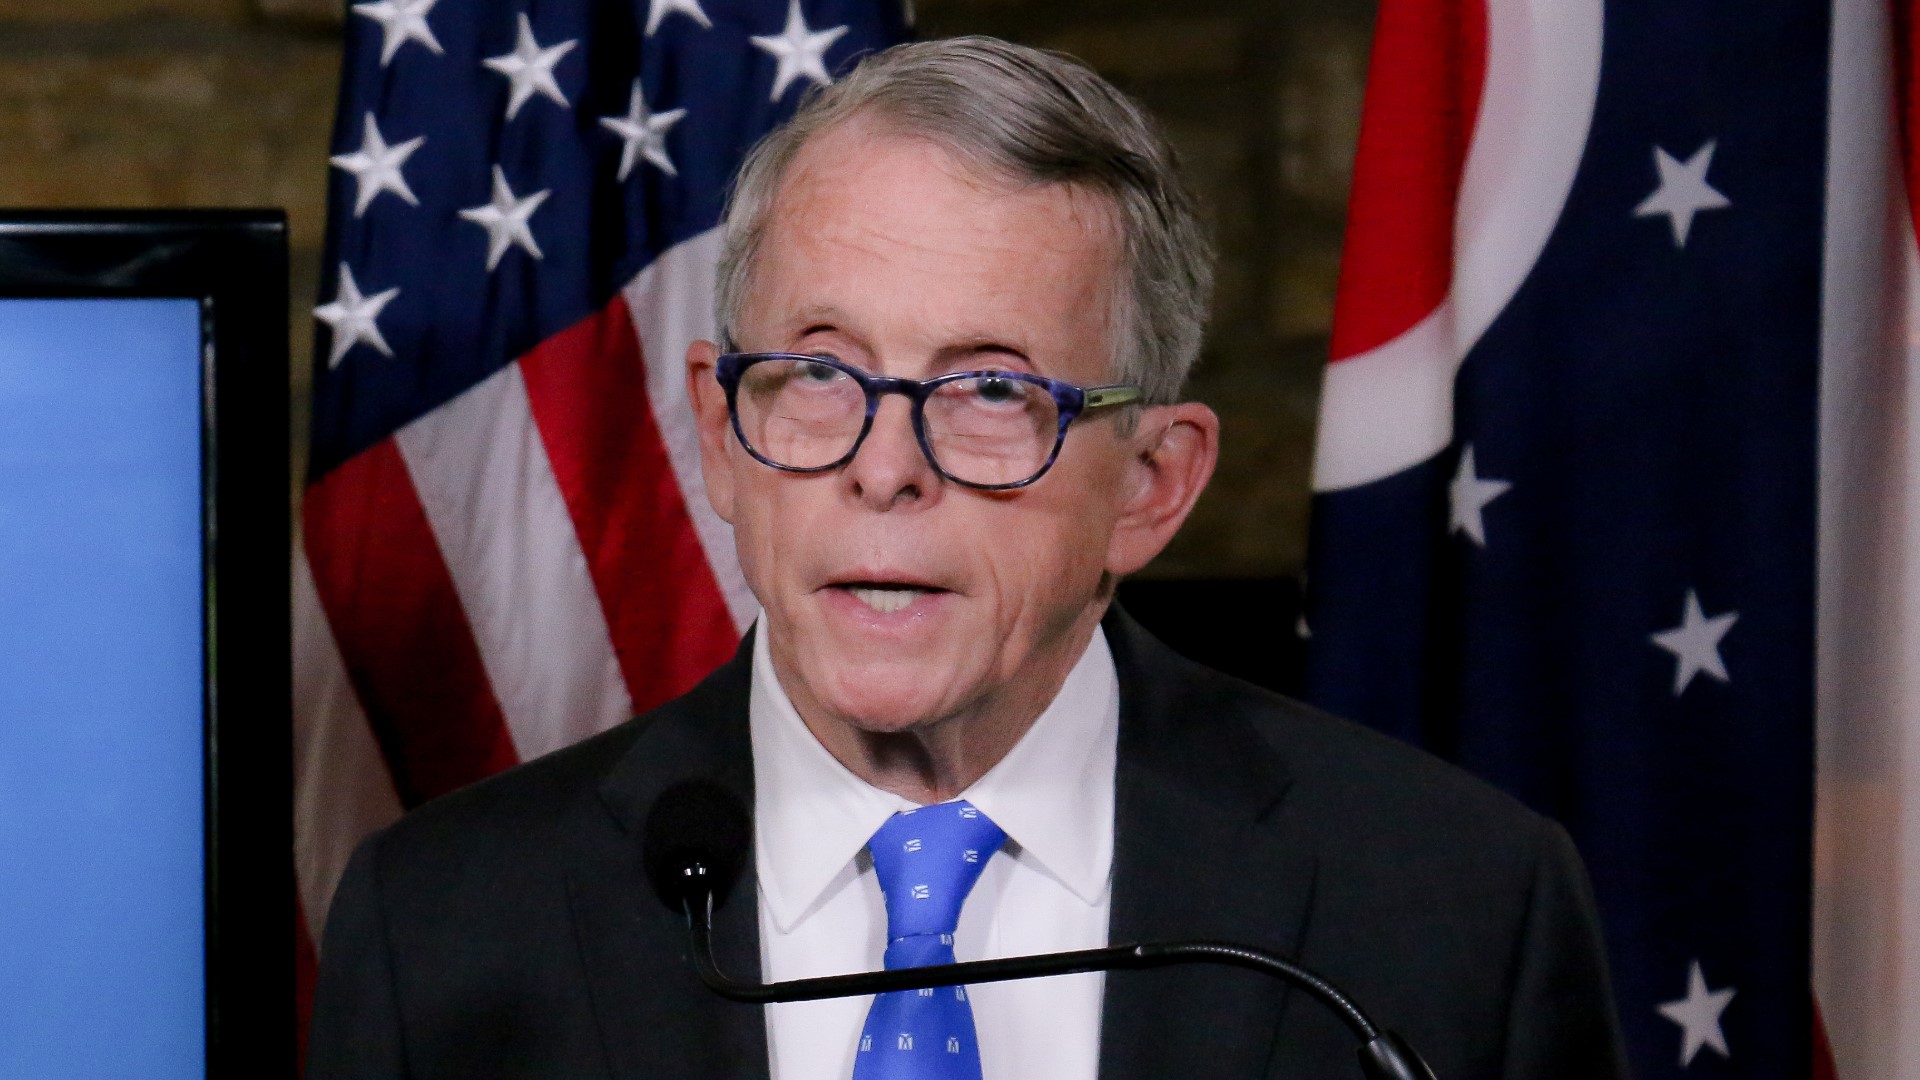 Gov. Mike DeWine says there is no choice but to do more to help ease the burden on Ohio healthcare workers as coronavirus cases and hospitalizations in the state con